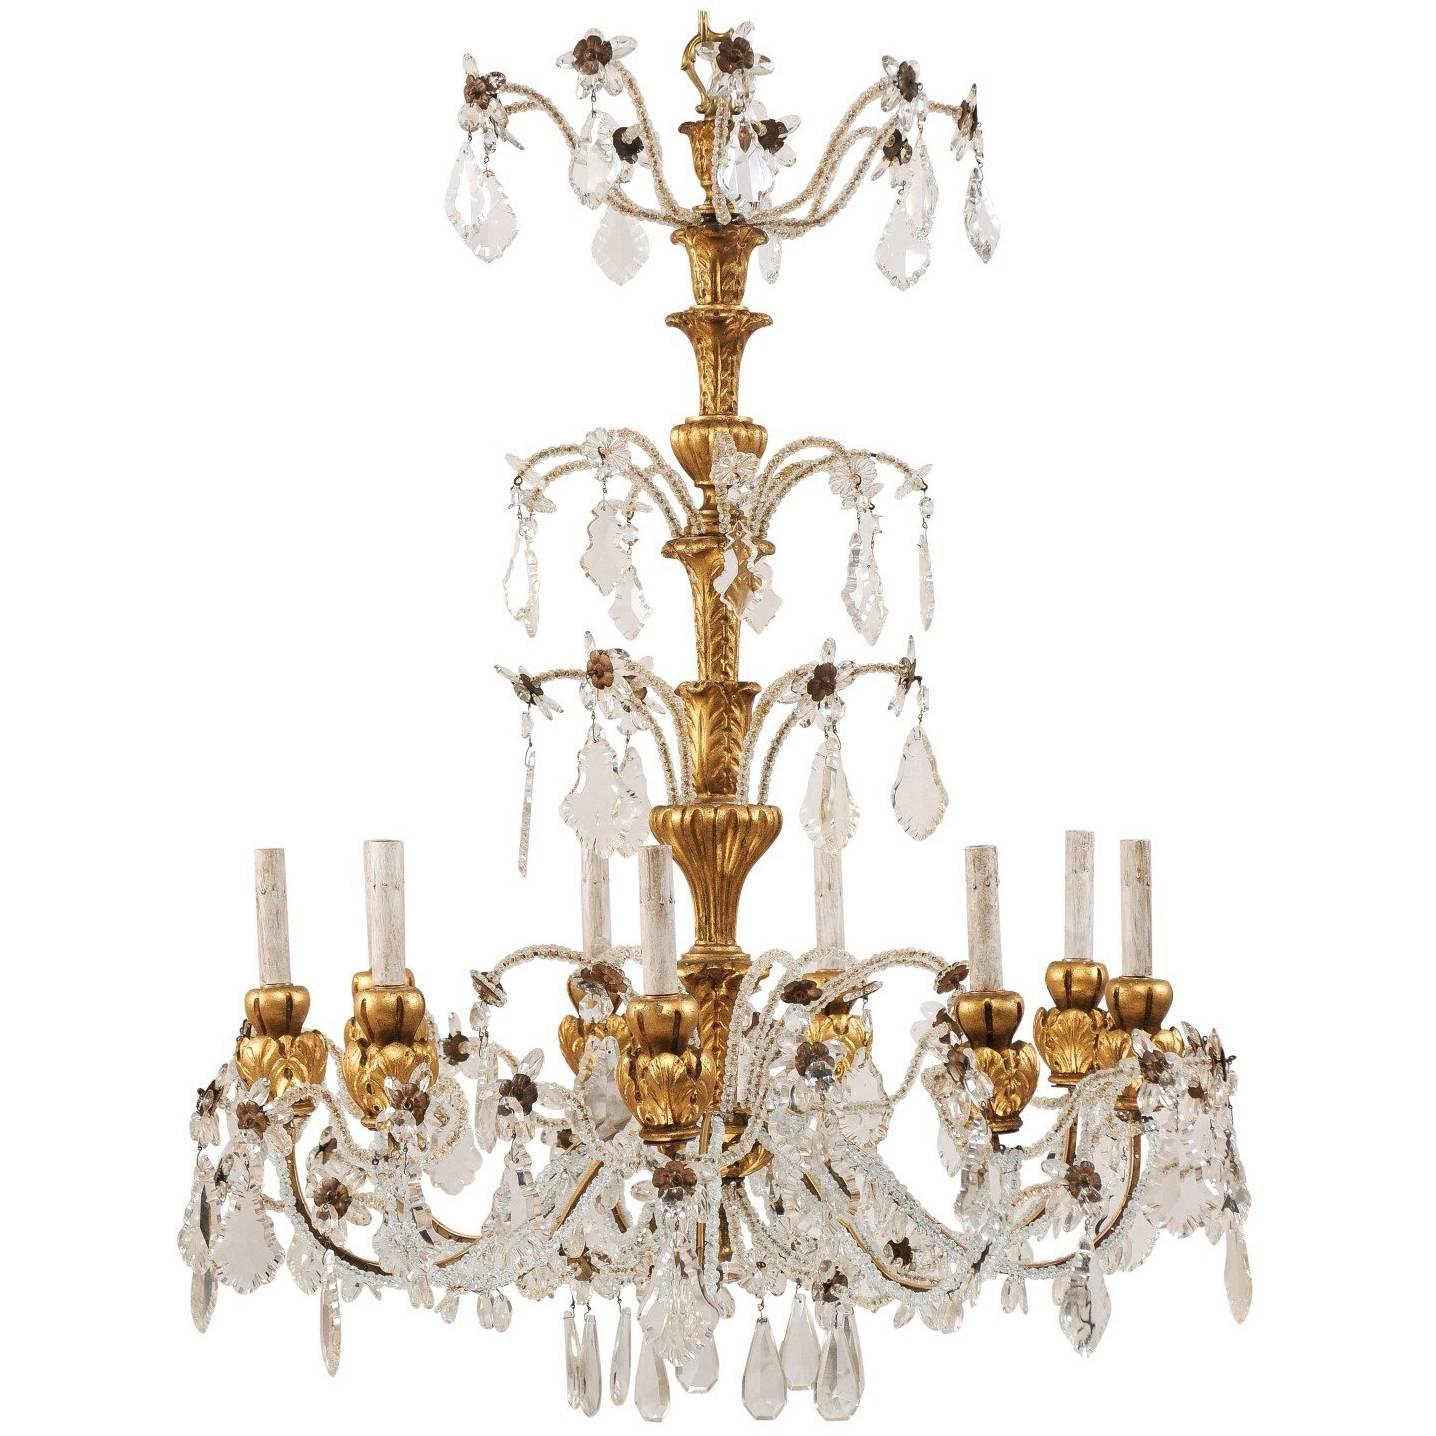 Exquisite Italian Vintage Gilded and Carved Wood Multi-Tiered Crystal Chandelier